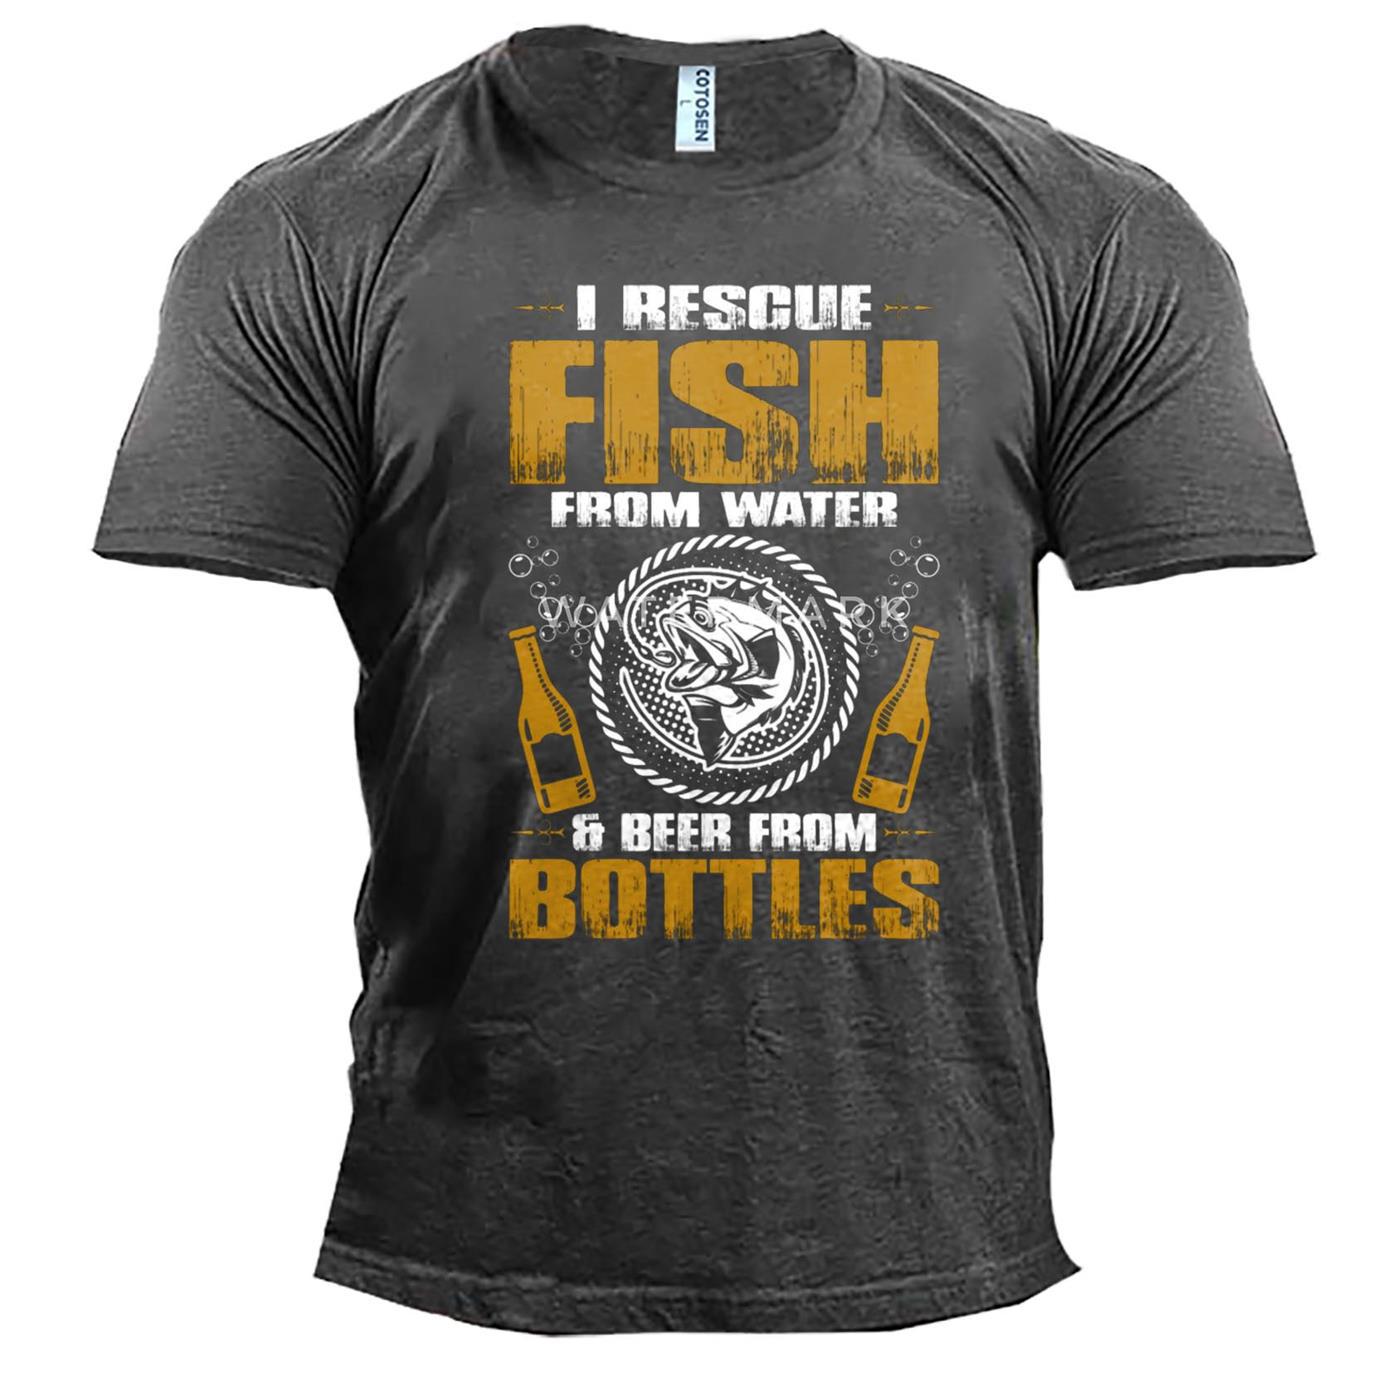 Men's Rescue Fish From Chic Water Beer From Bottles Cotton T-shirt